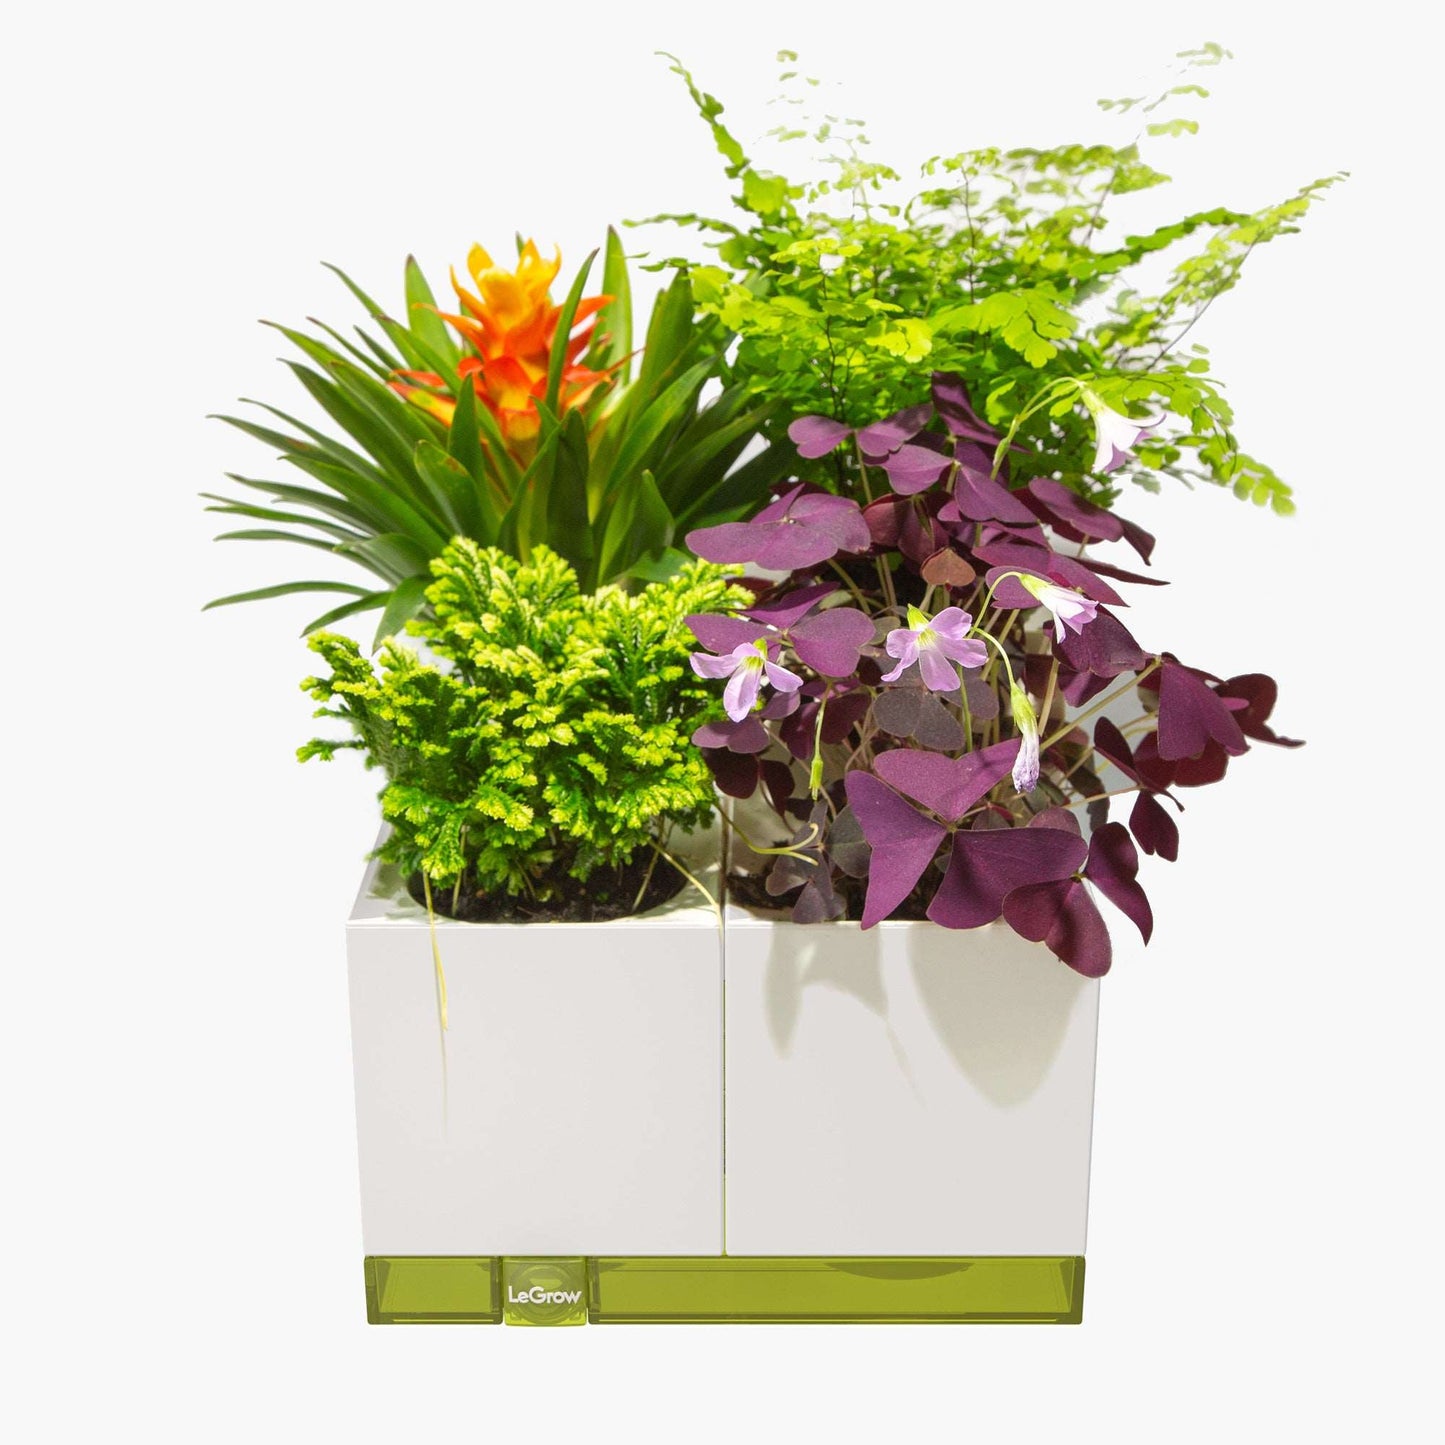 LeGrow Standard Planter with Self-watering System 7 Days Watering Free